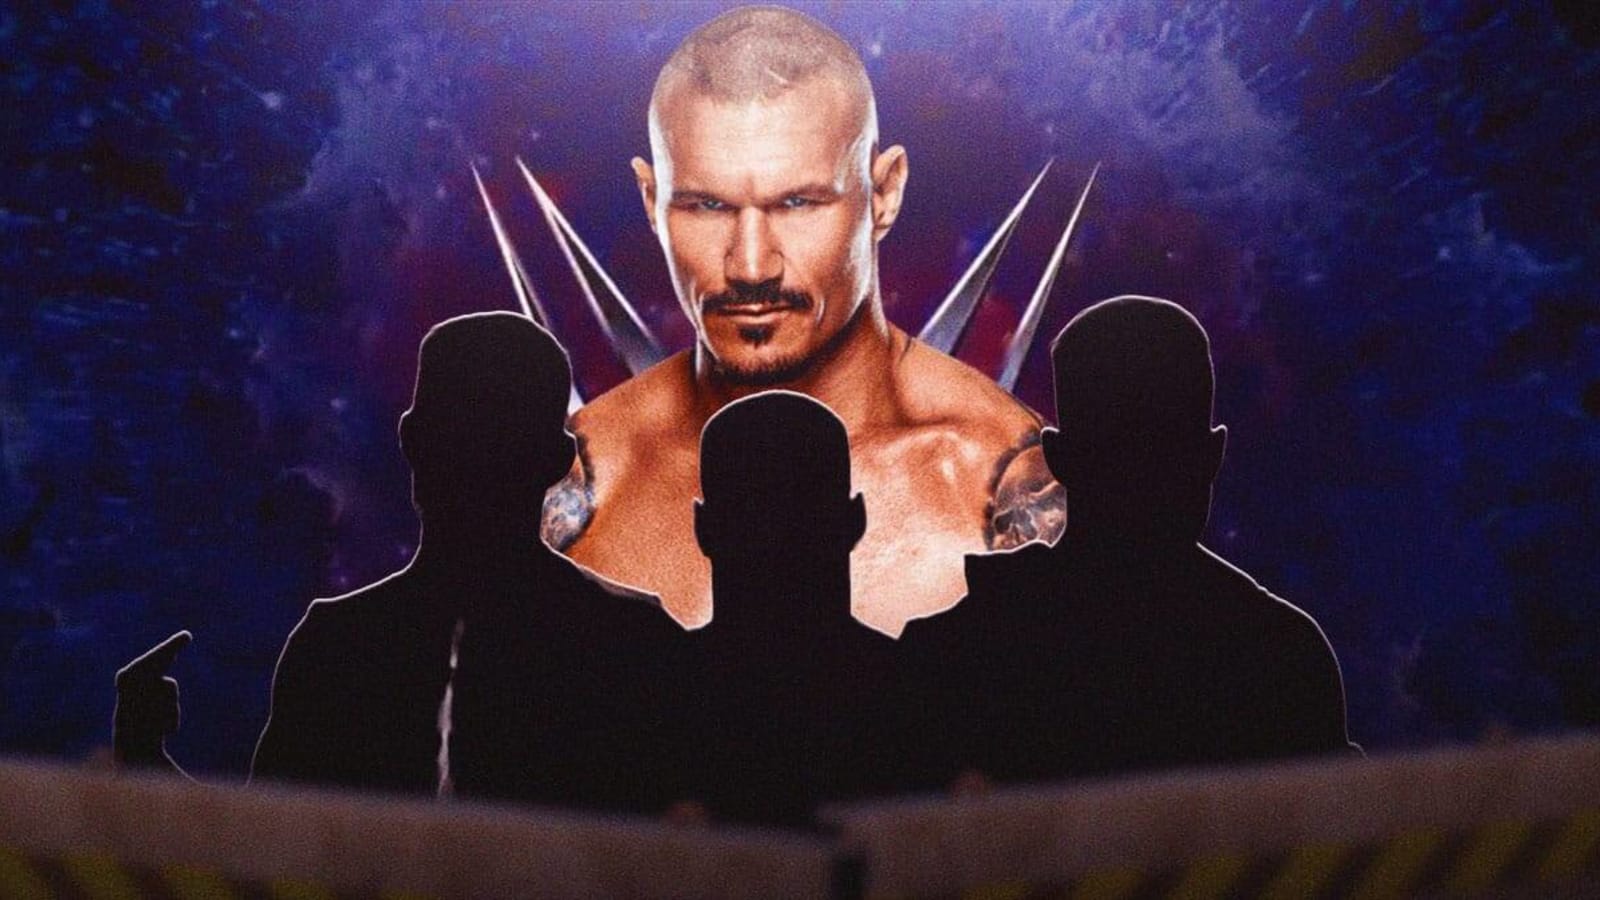 Randy Orton names three young performers who have next in WWE